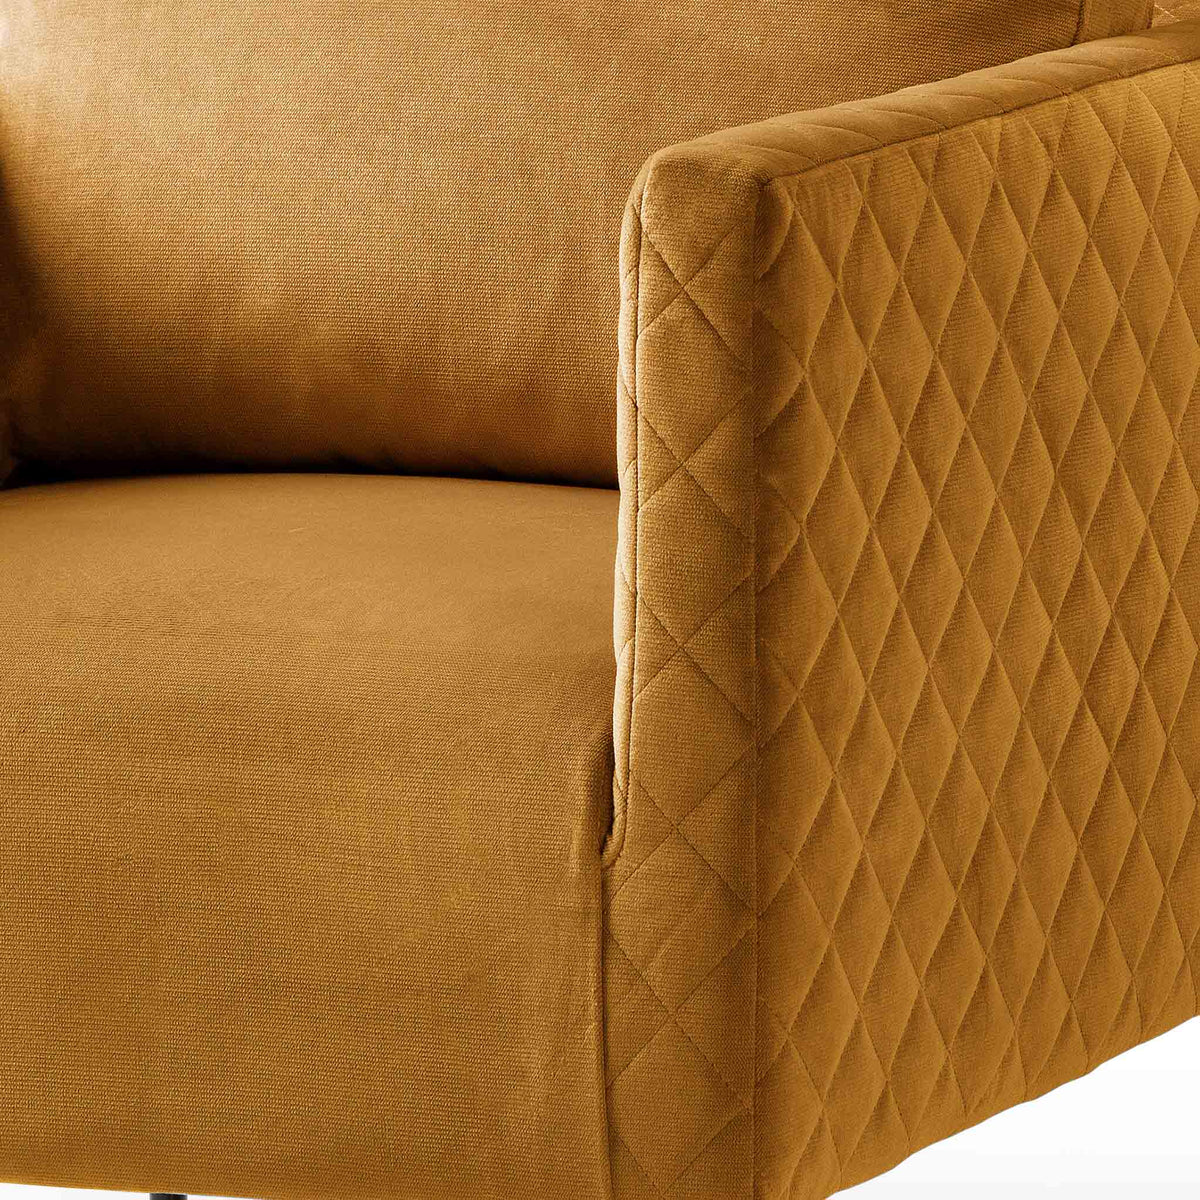 close up of the diamond stitching on the Bali Gold Velvet Accent Chair